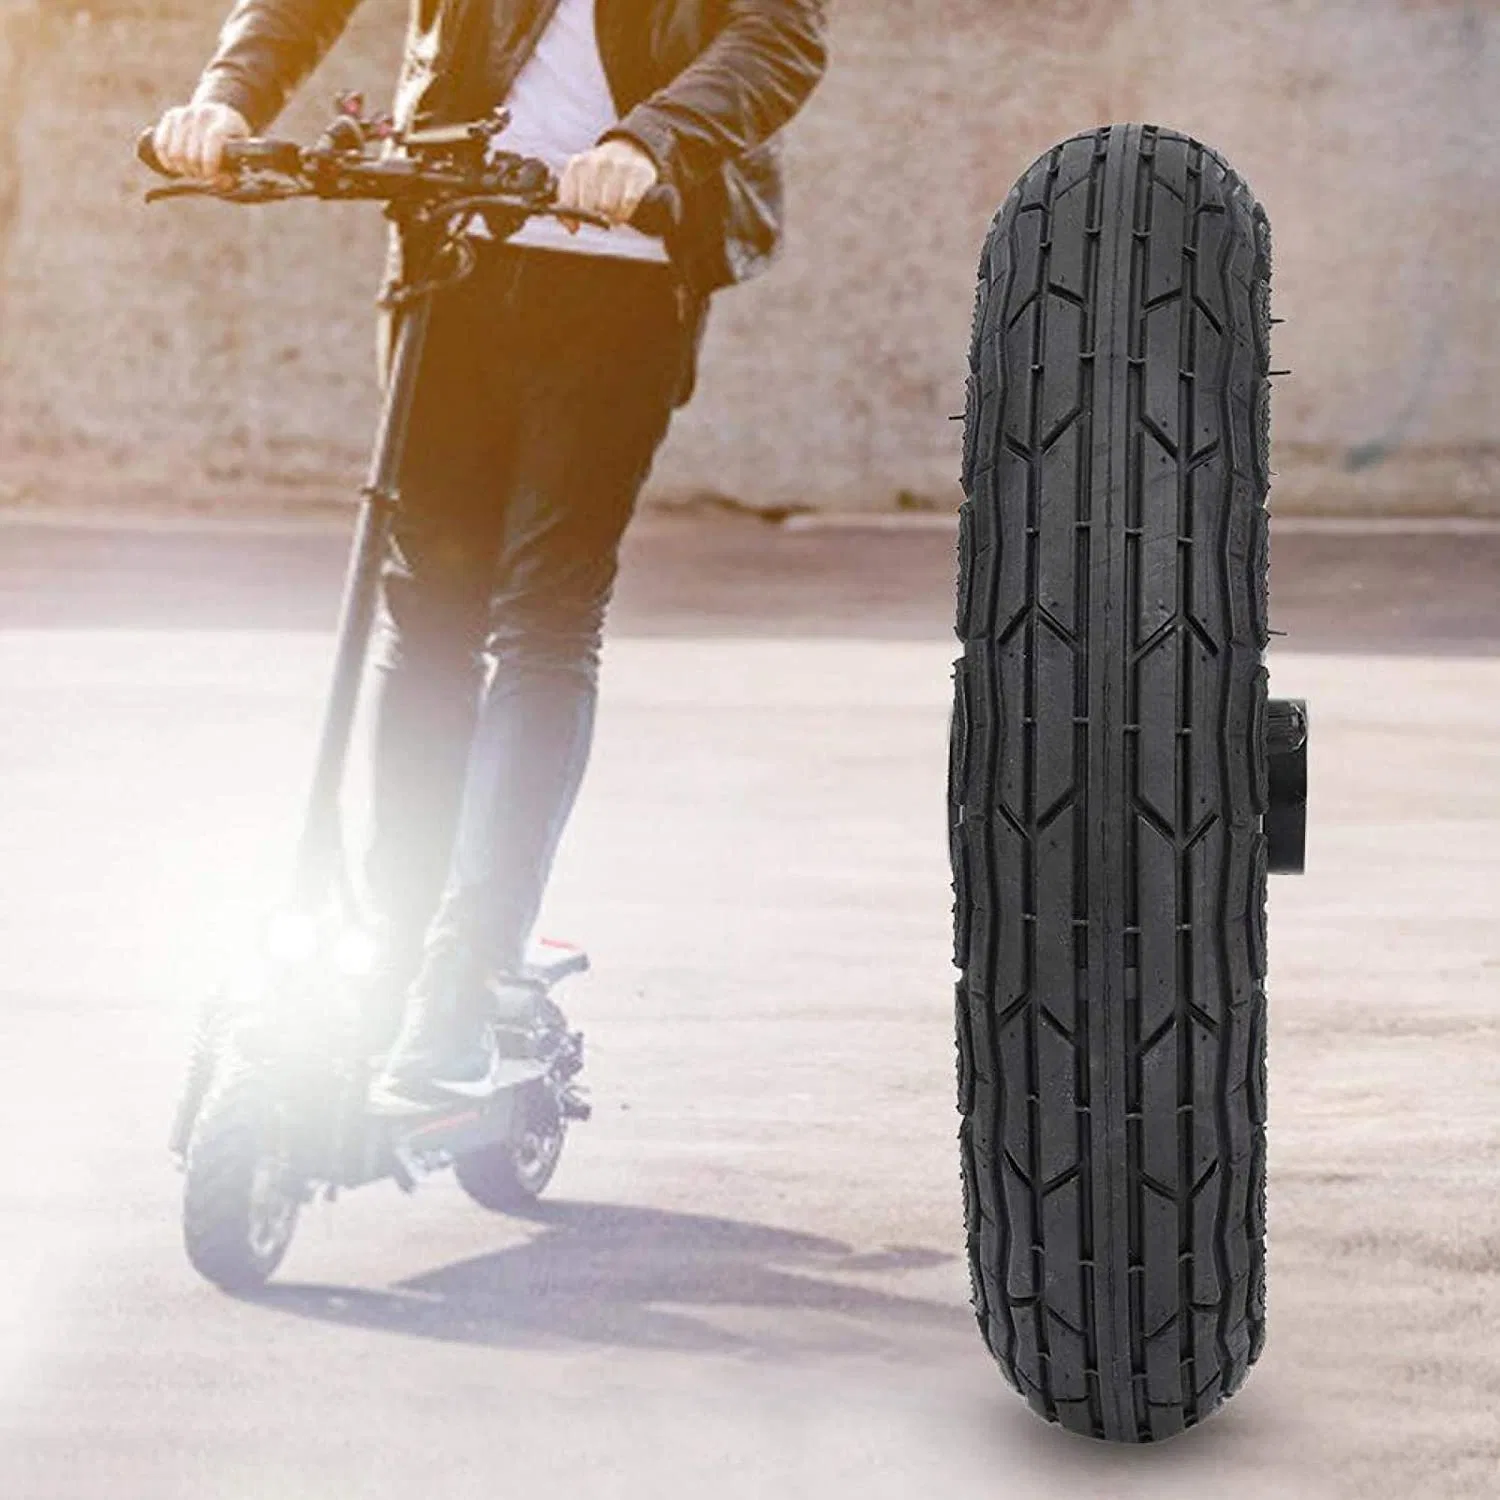 8inch Scooter Wheel with 6 Holes Disc Mount Compatible with Bicycle Disc Brake "200X50" Wheel for Disc Brake Scooter